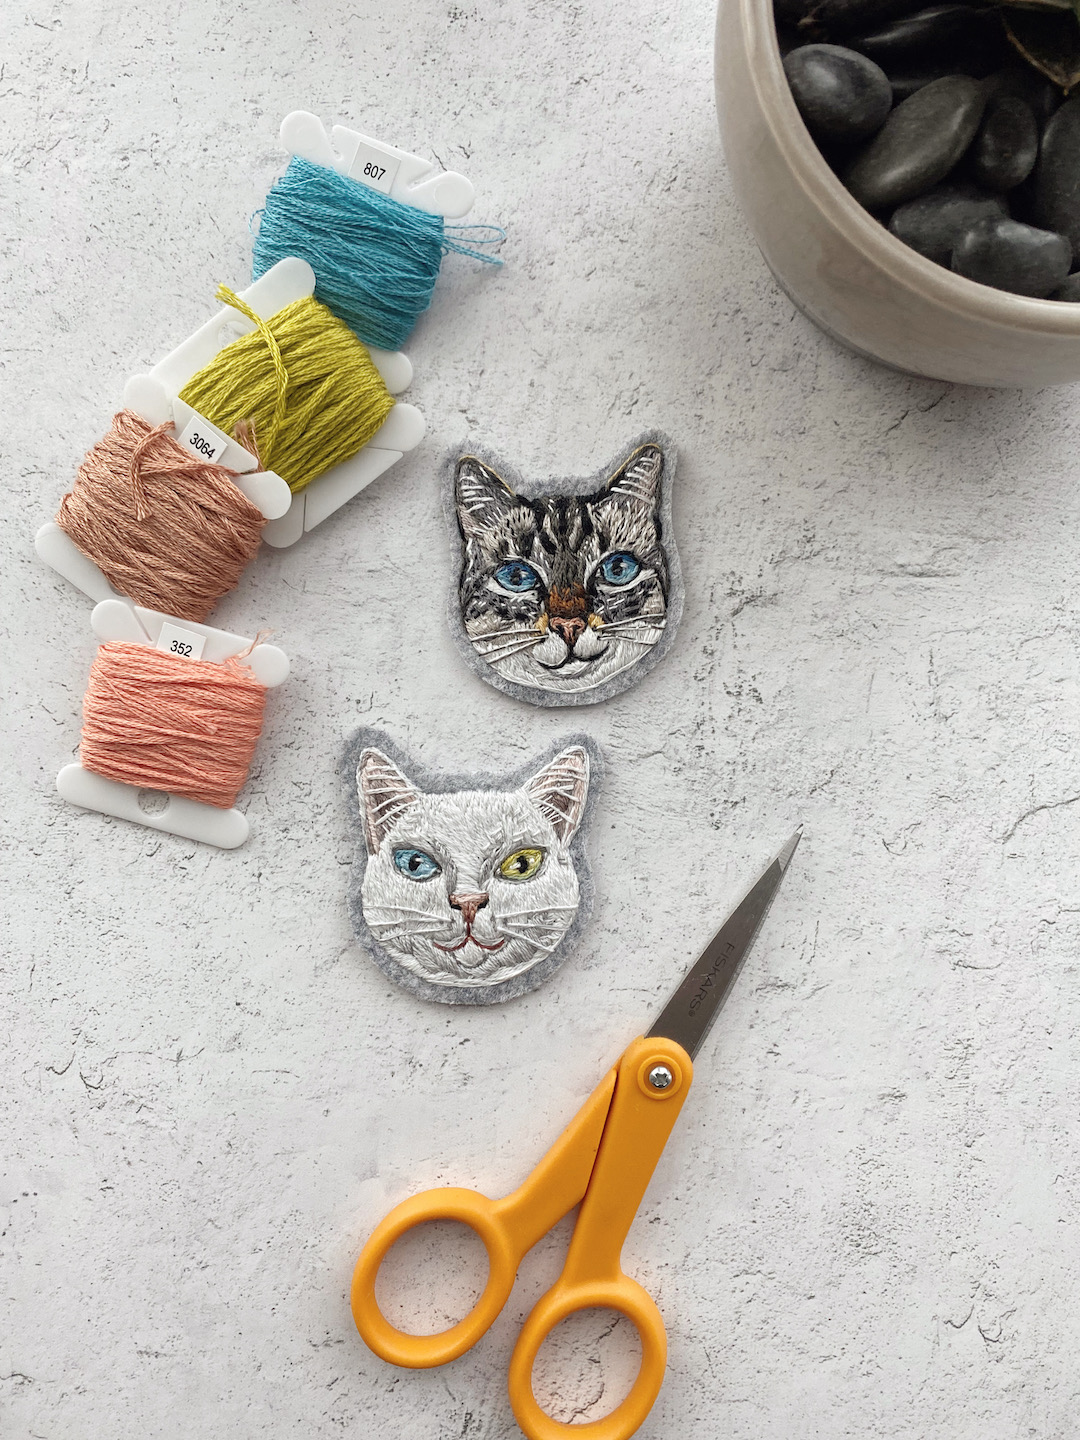 Custom embroidered pet portrait patch of two cats